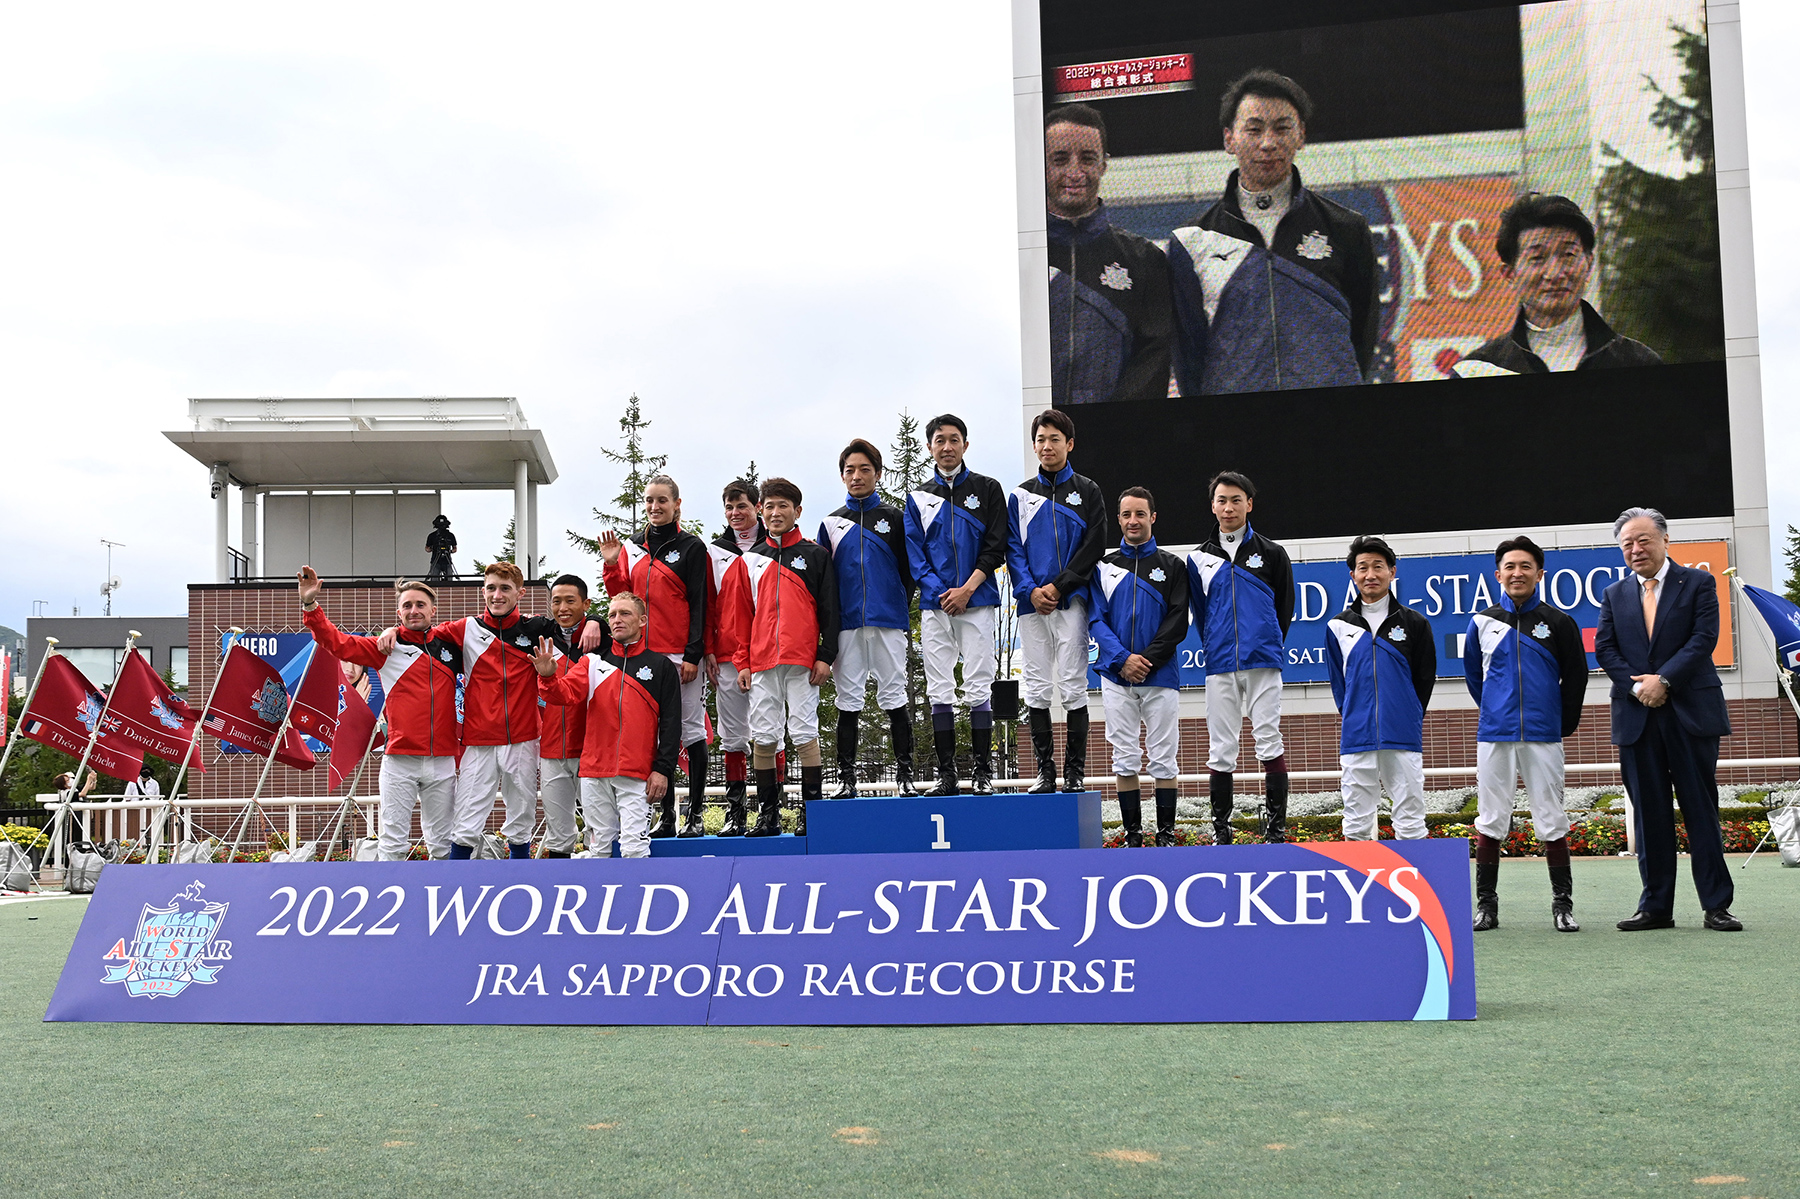 Vincent Ho and other jockeys participating in this year’s World All-Star Jockeys take a group photo at the presentation ceremony. (Photo: Tomoya Moriuchi)